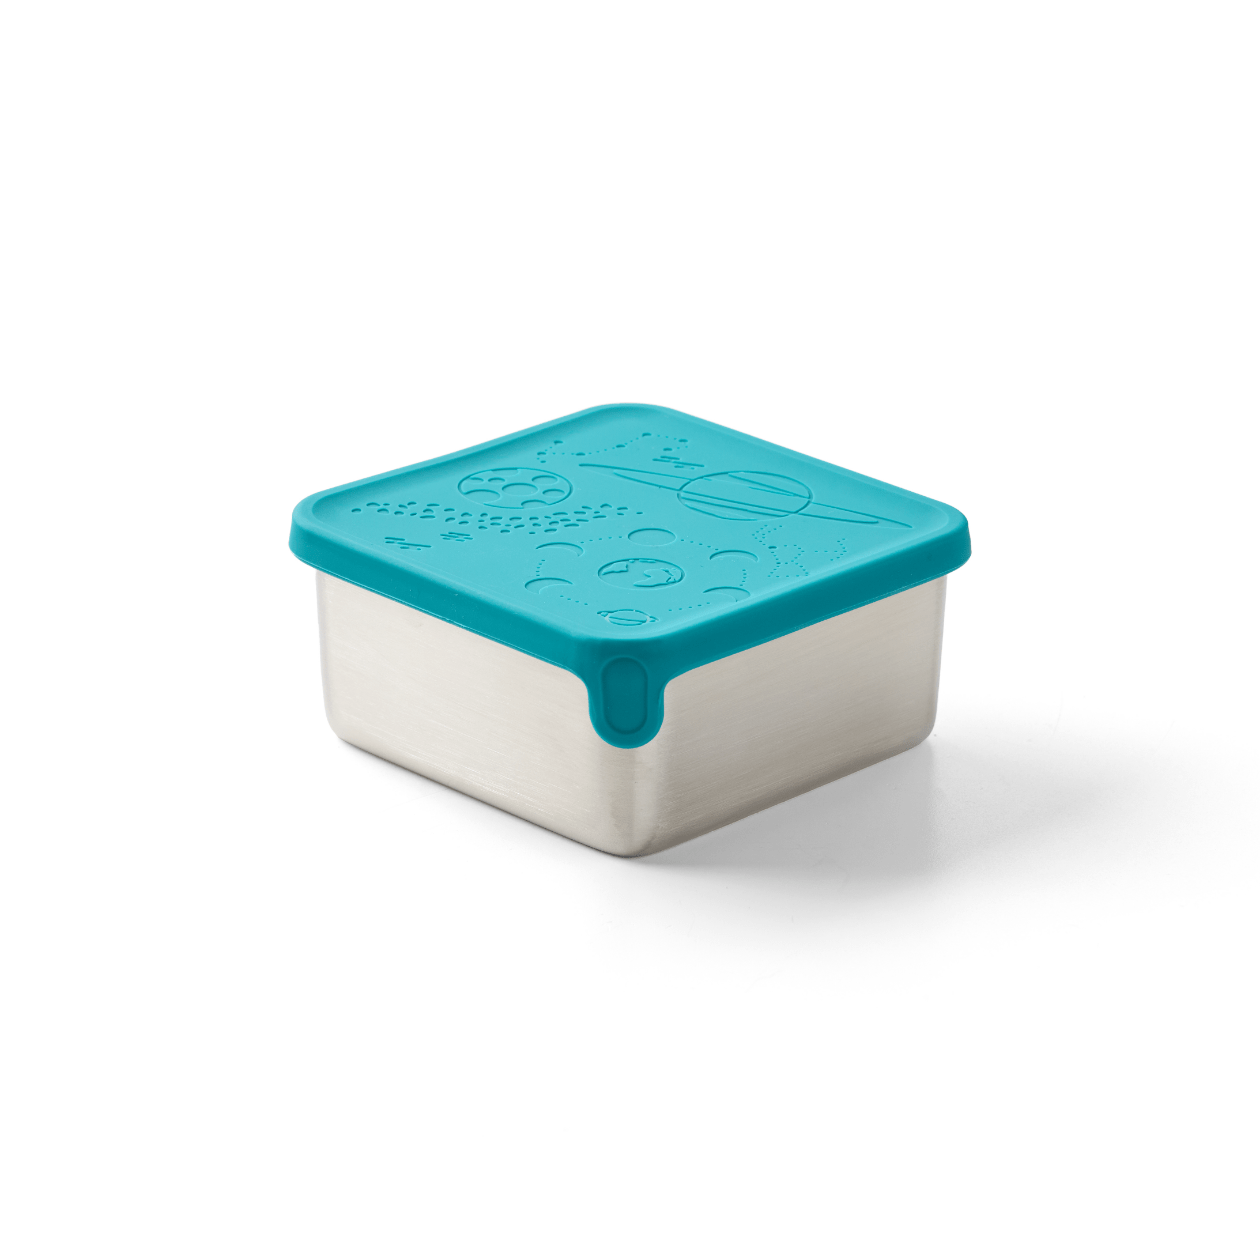 Big Square Dipper (12.3oz) for PlanetBox Launch and Shuttle: Galactic